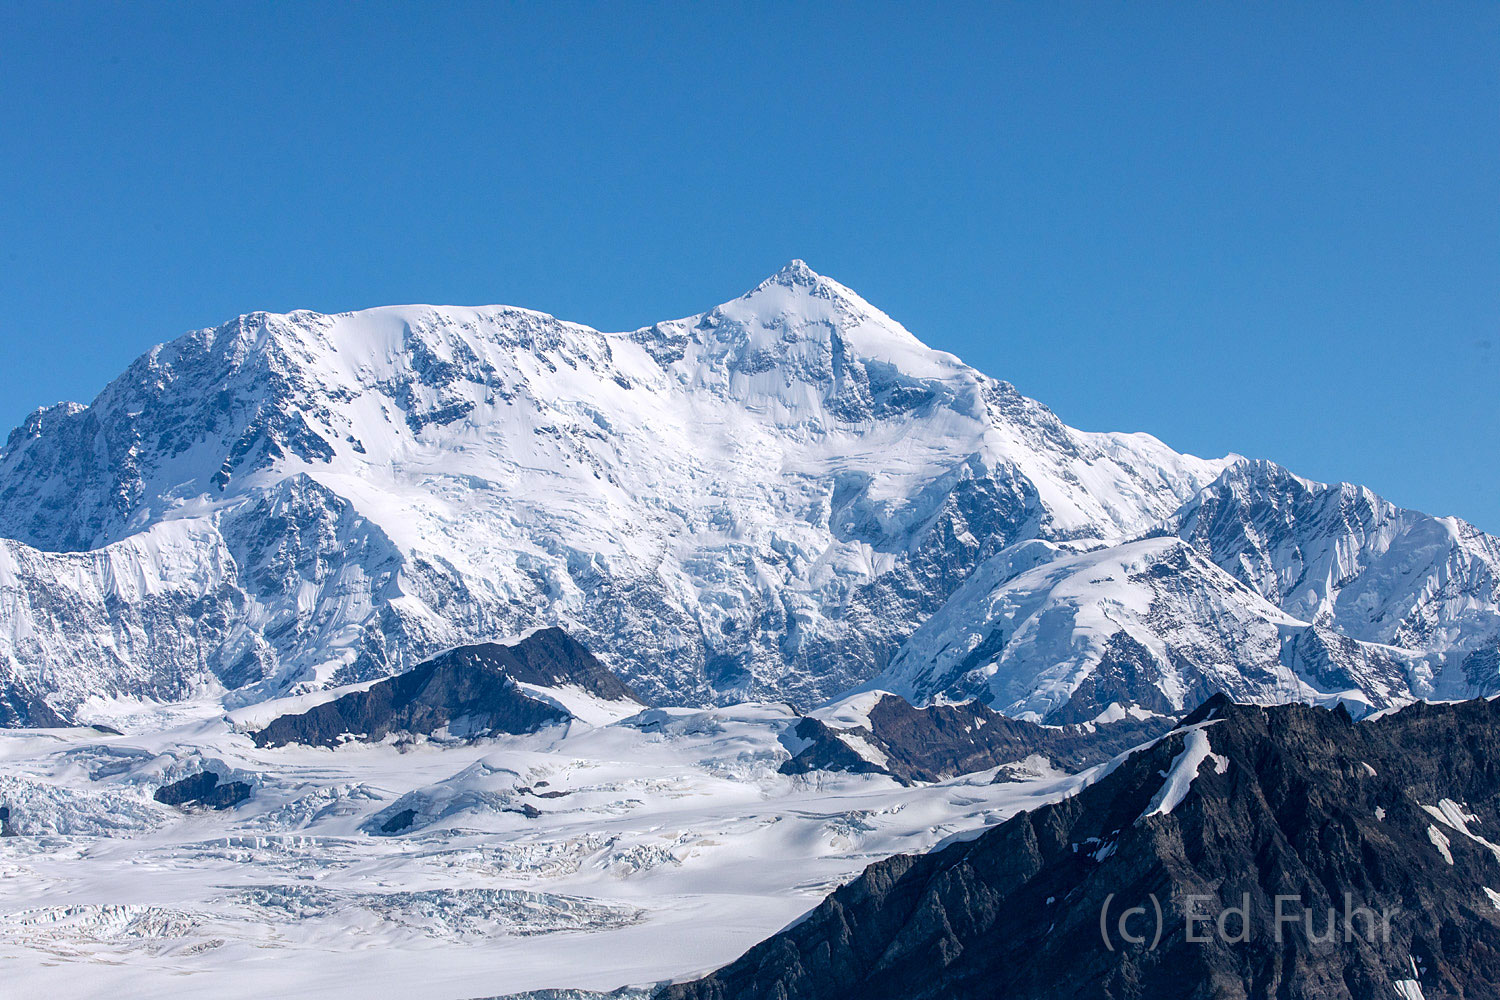 Mount Saint Elias, the second highest mountain in both Canada and the United States, rises from the shores of the Pacific Ocean...